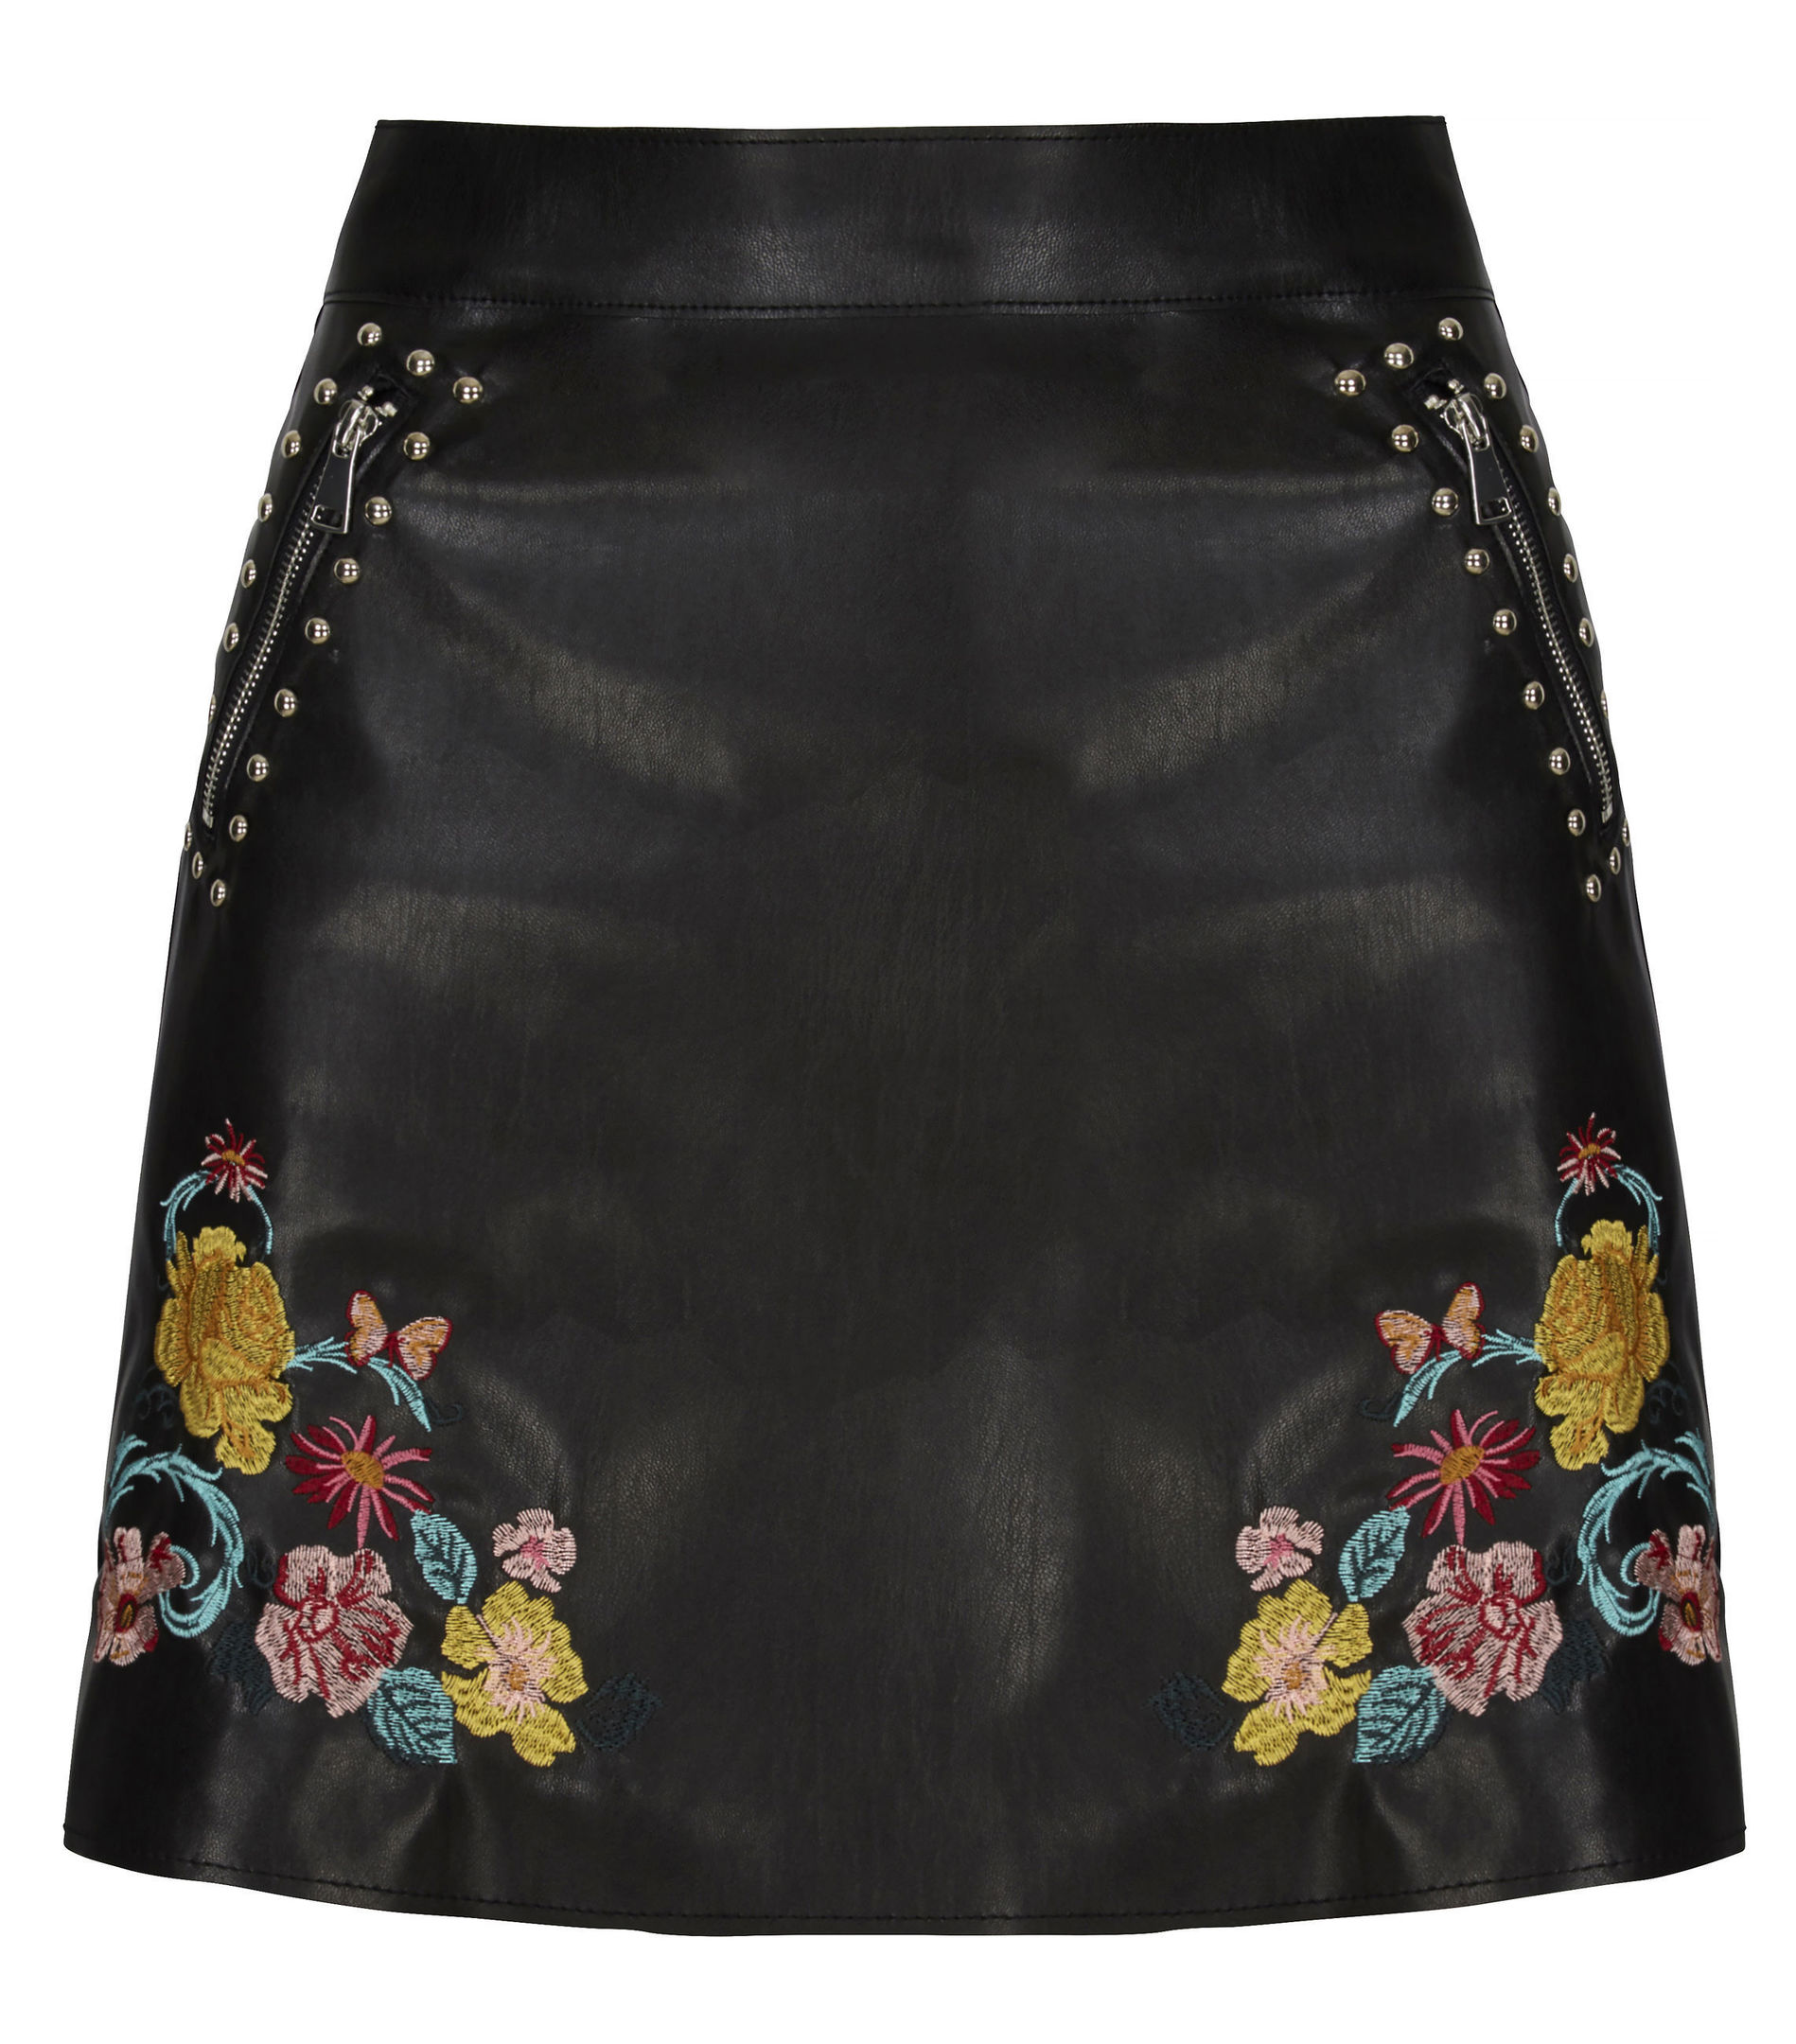  Glamorous Embroidered Floral PU Skirt, available from Littlewoods. 